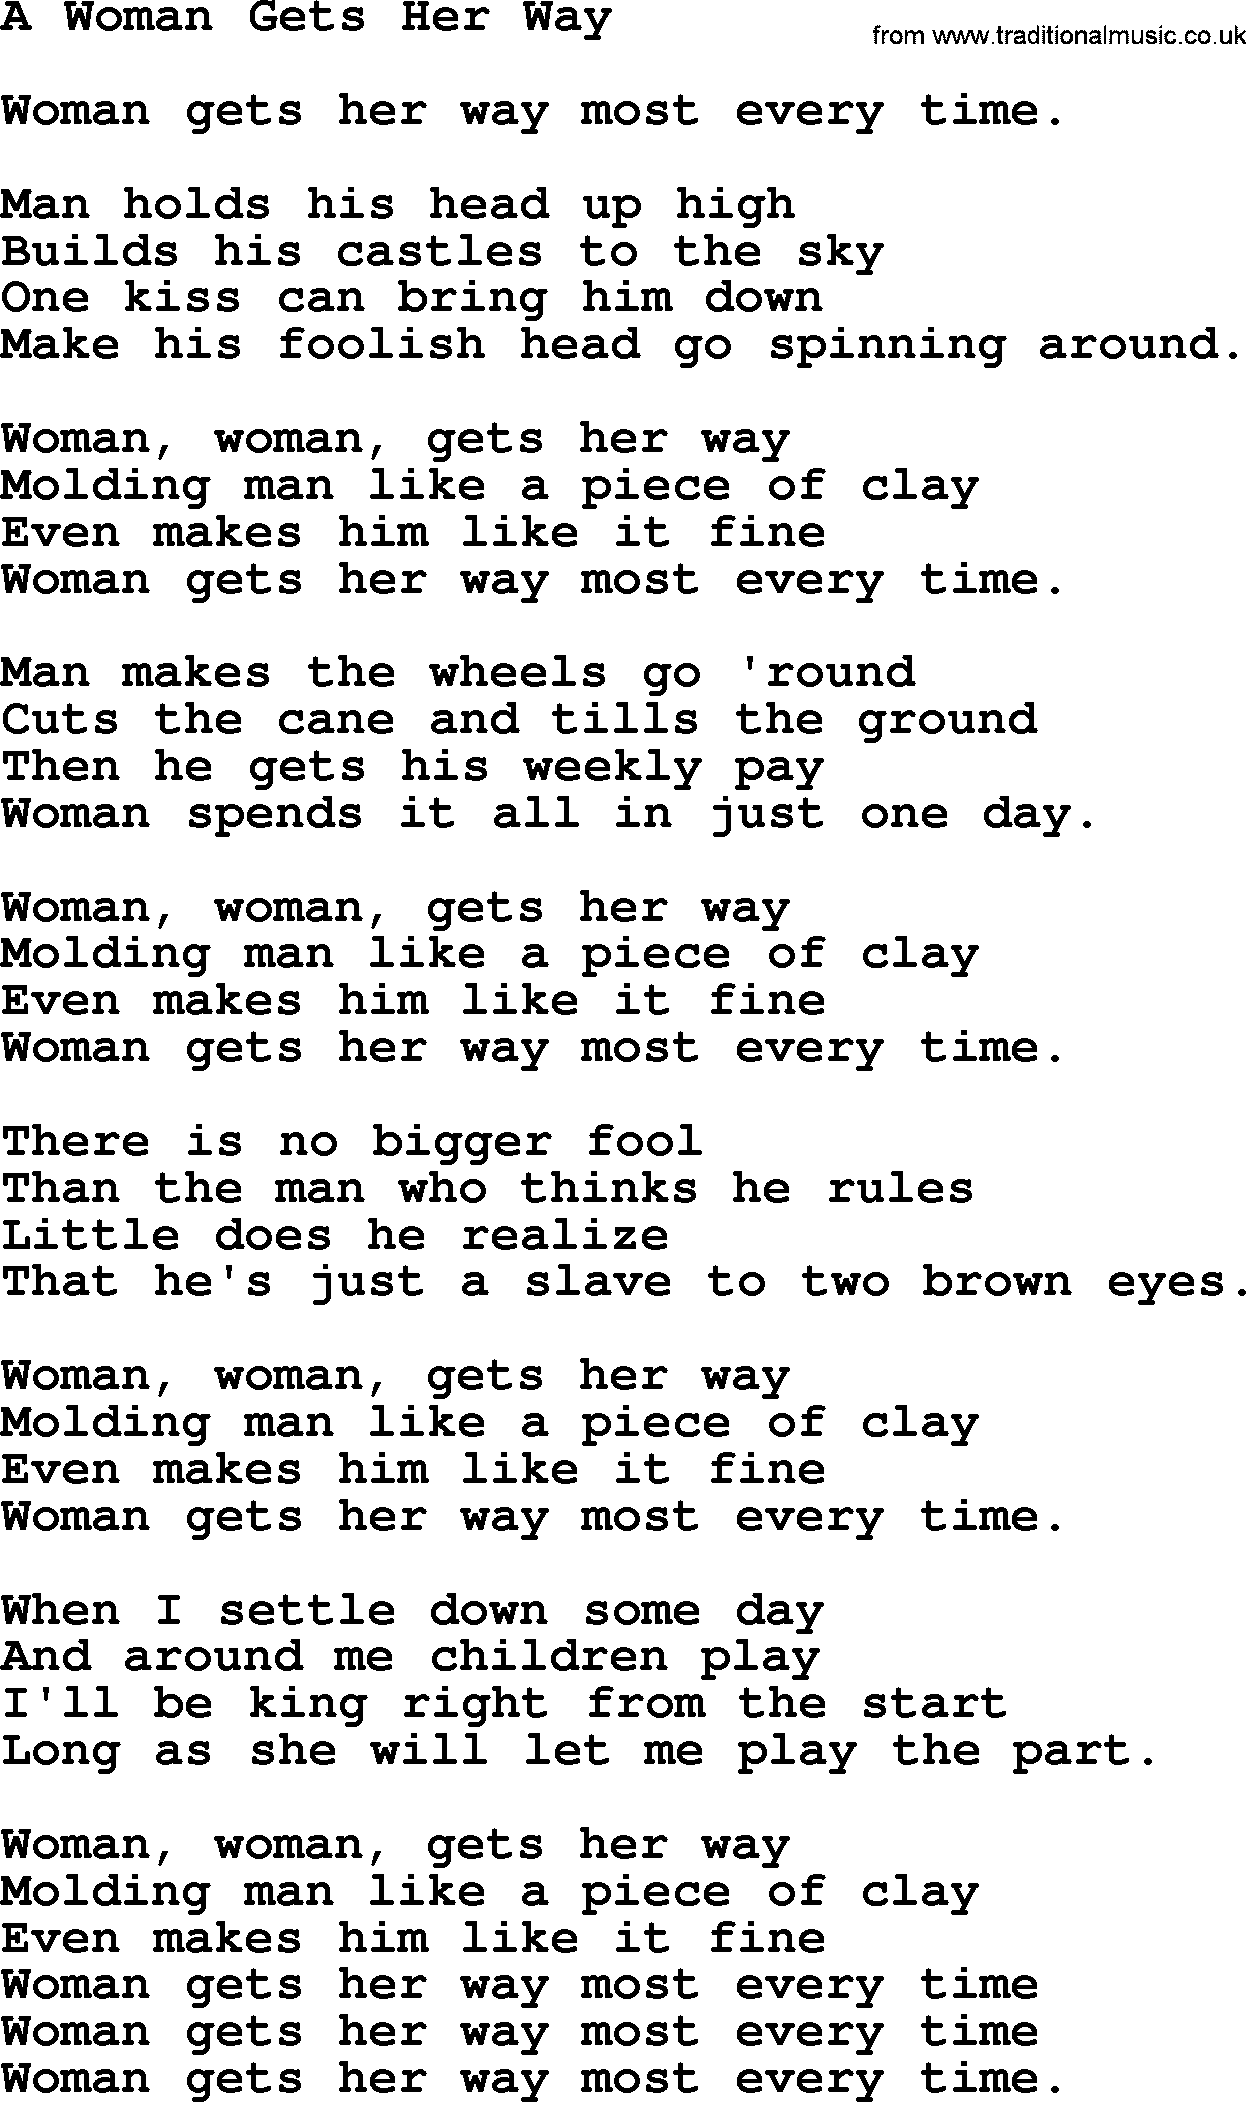 Marty Robbins song: A Woman Gets Her Way, lyrics